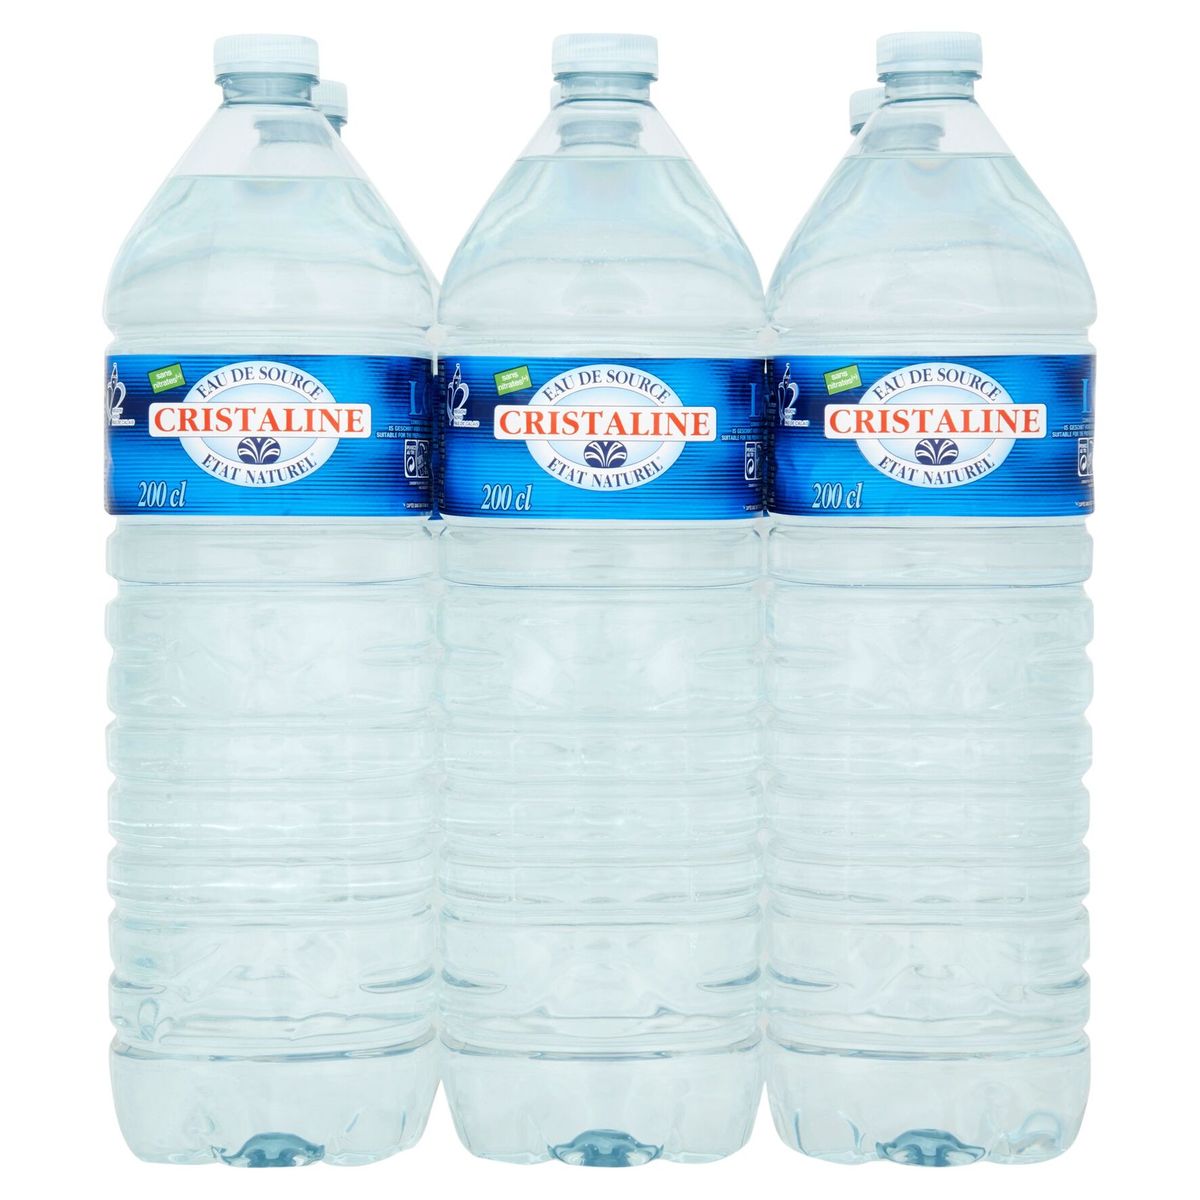 Cristaline Louise Bronwater 6 x 2 L